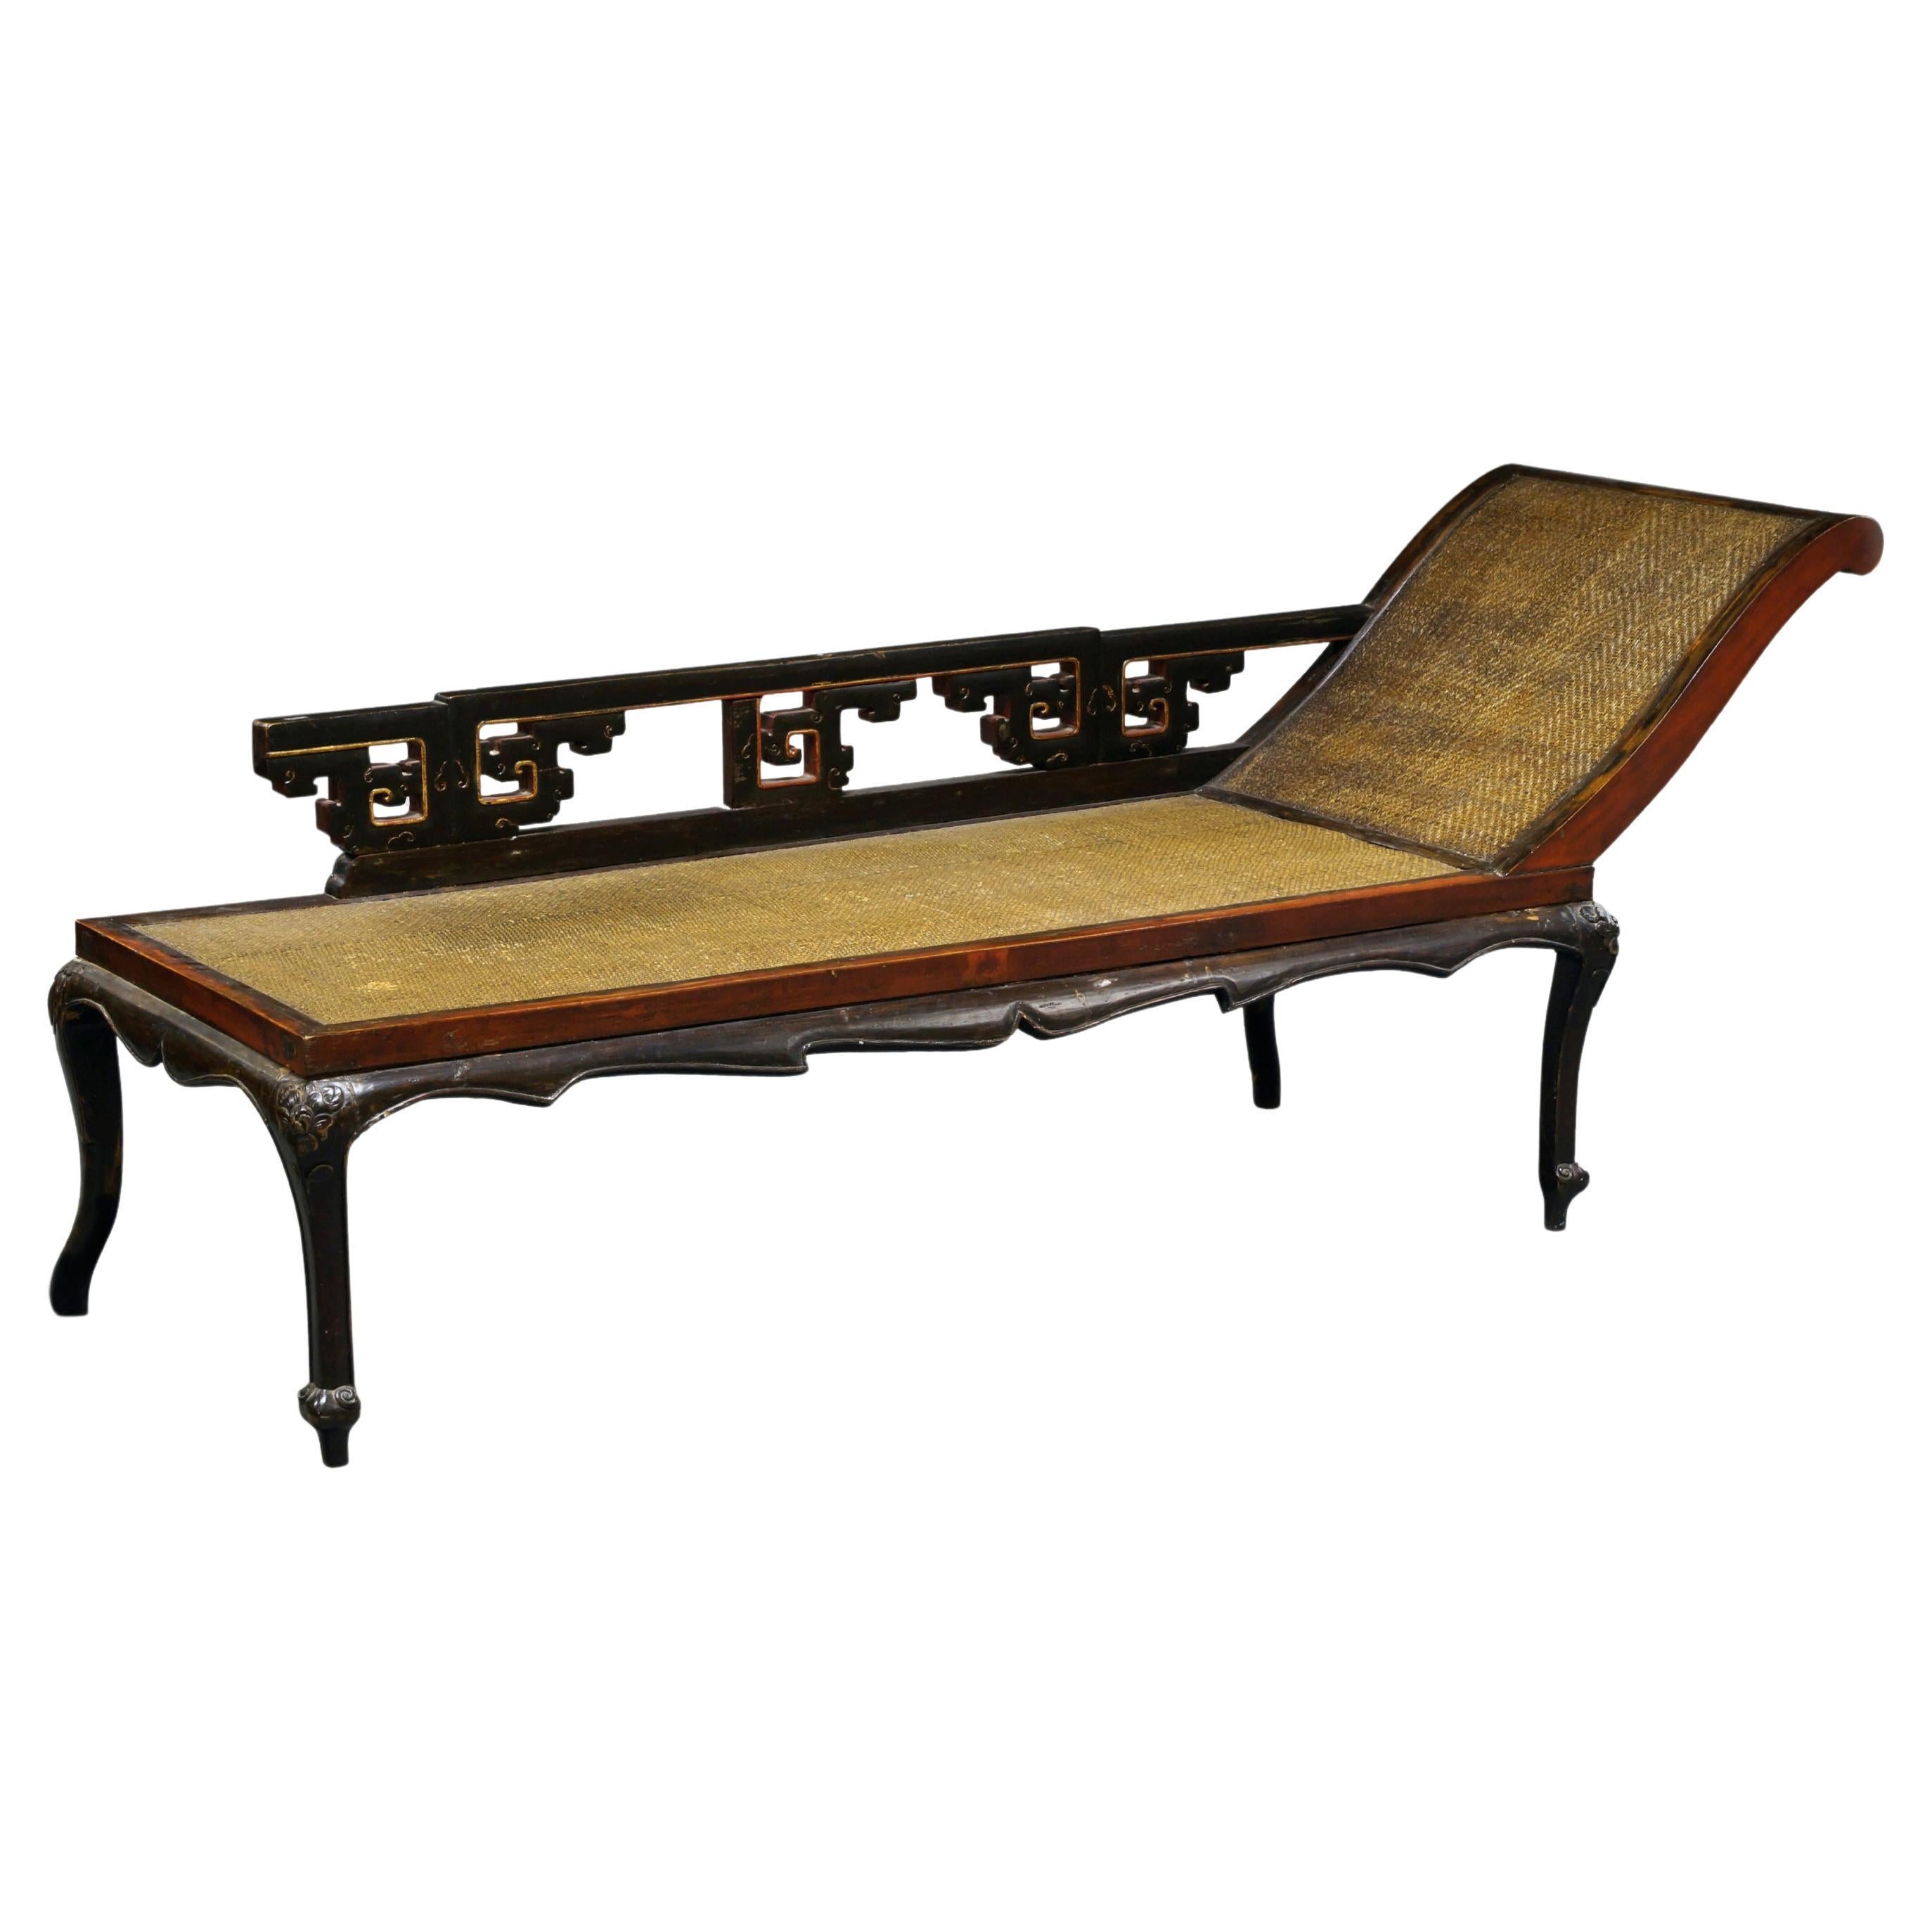 Chinese Hardwood Rattan Daybed Antique Qing Chaise Lounge Victorian Regency 1890 For Sale